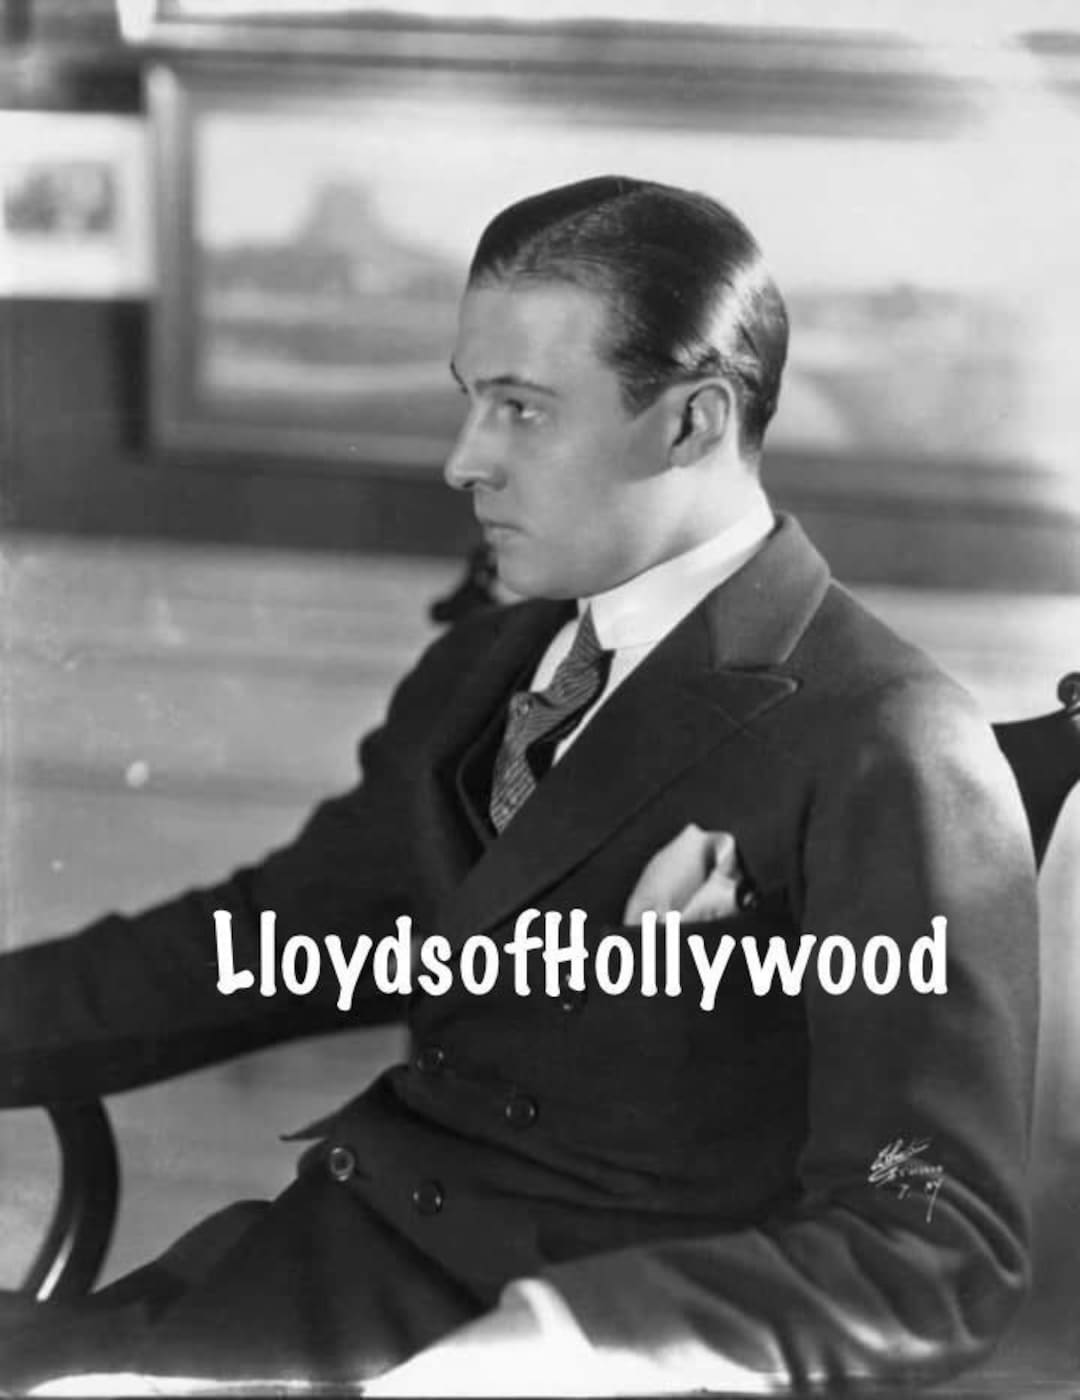 Rudolph Valentino | THE CABINET CARD GALLERY